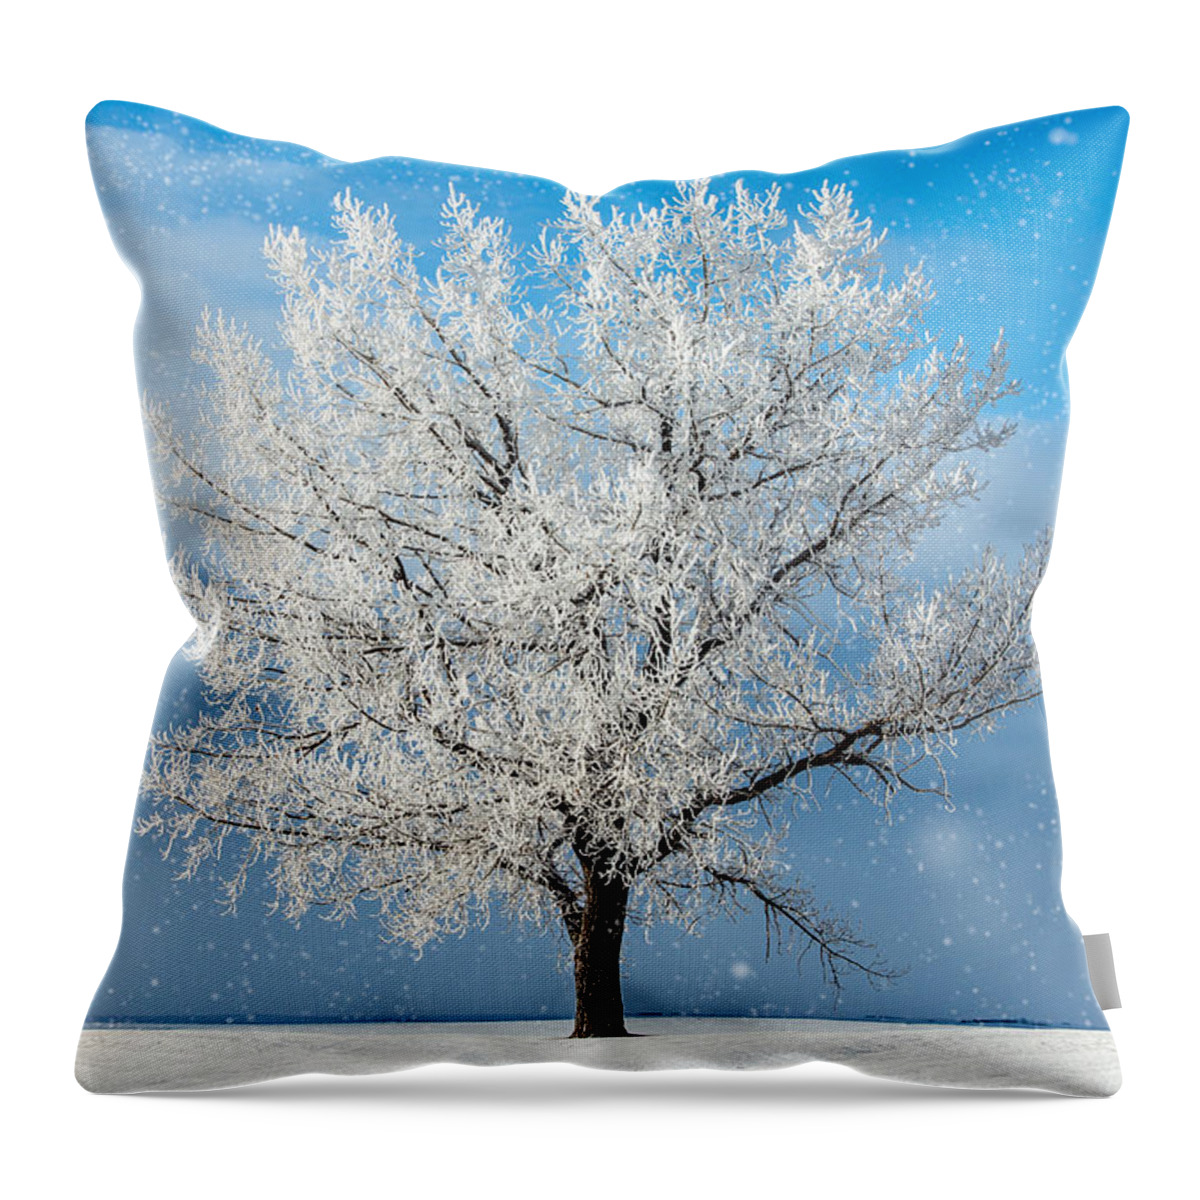 Beautiful Throw Pillow featuring the photograph Frozen Limbs by Todd Klassy